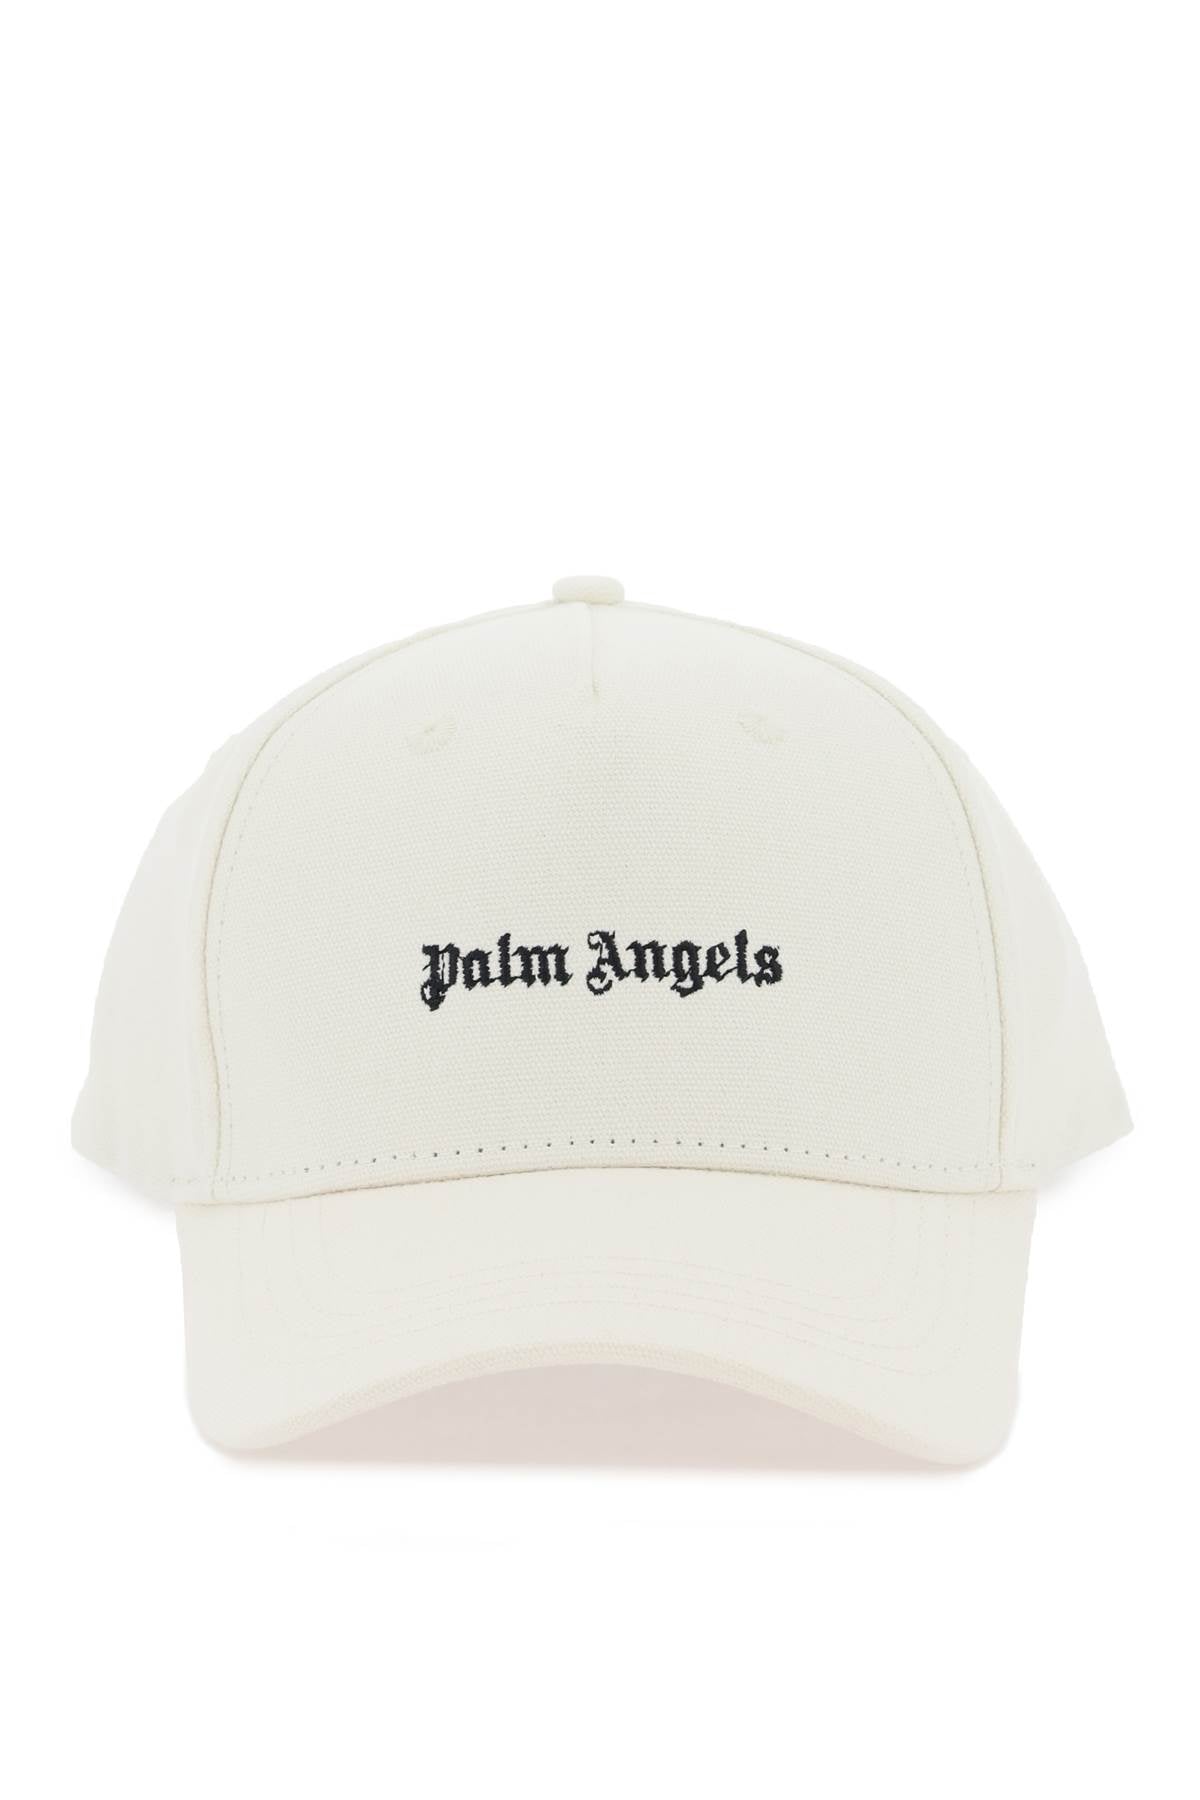 Palm angels embroidered baseball cap-0